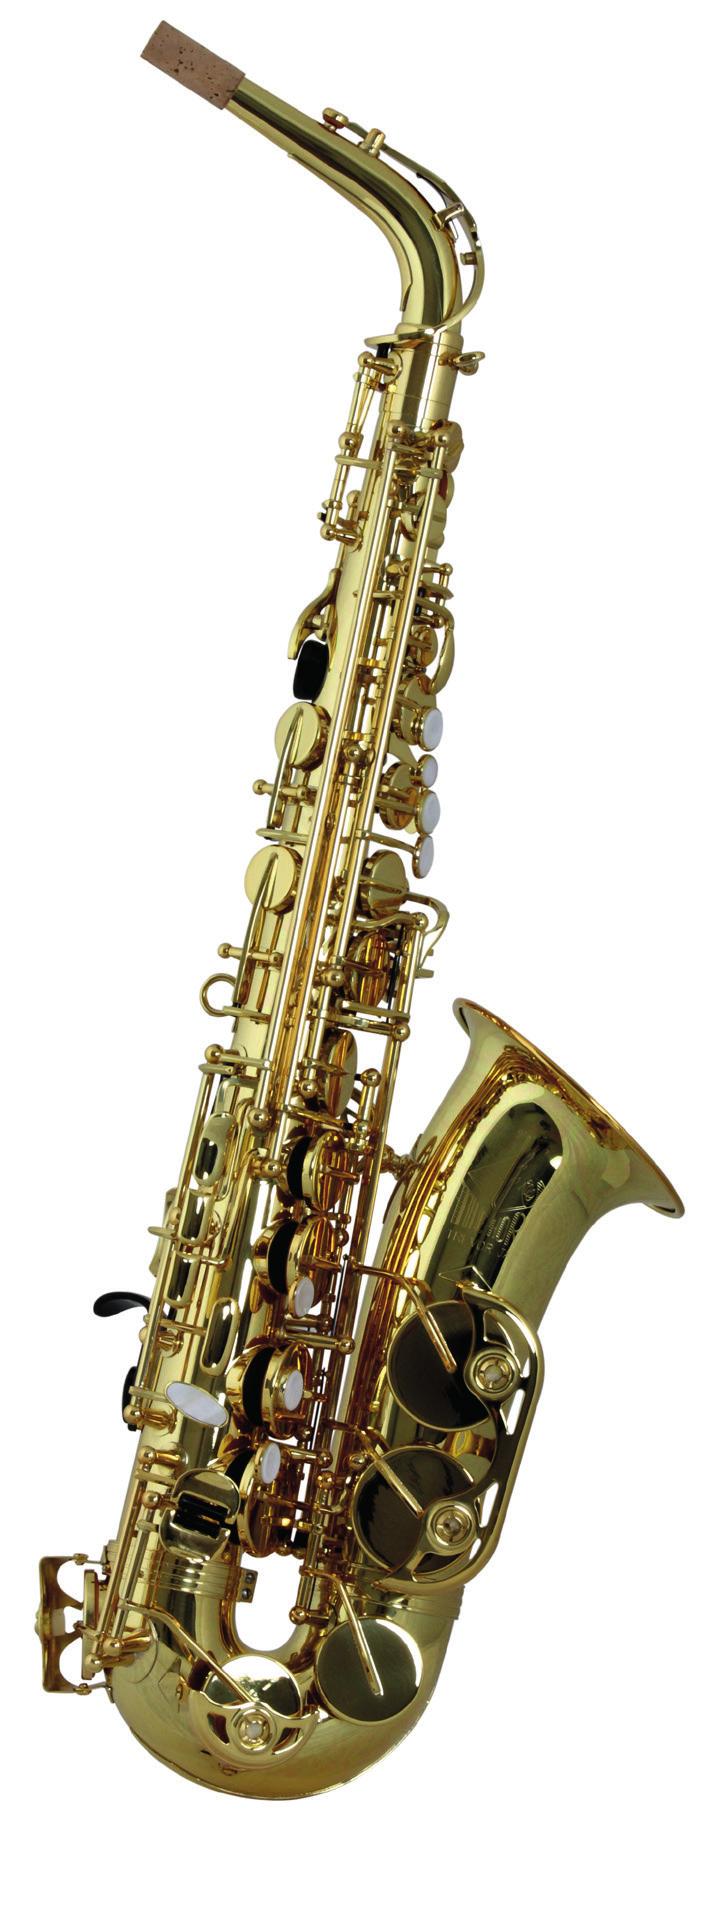 Classic alto Model: TJ Classic alto Free blowing instrument Durable construction Updated crook design High quality Pisoni pads with metal reflectors Mother-of-Pearl touchpieces High